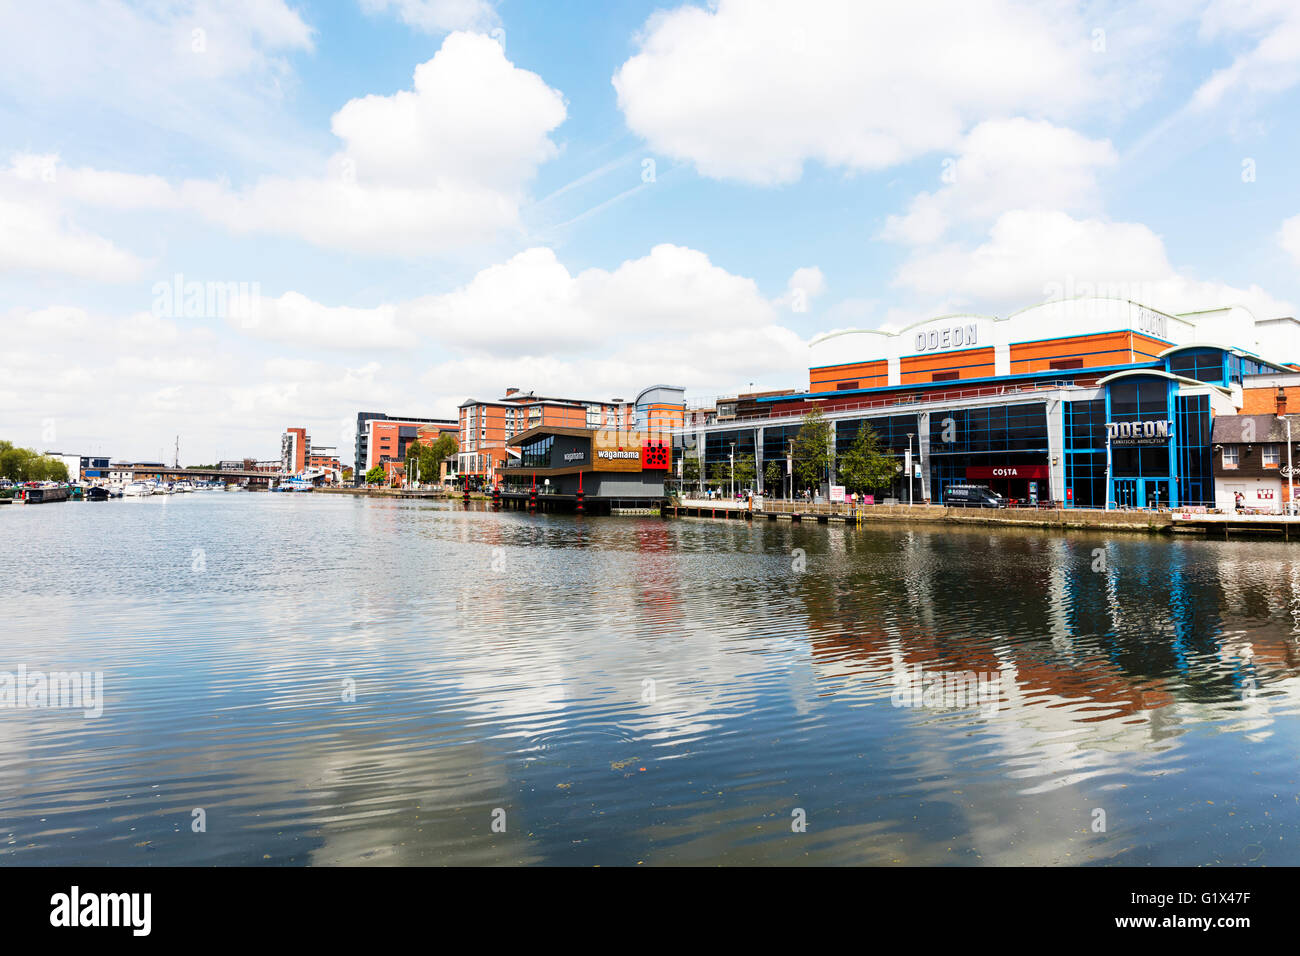 Brayford Pool Lincoln Waterfront  Lincolnshire England United Kingdom Lincoln City Lincolnshire UK English cities Stock Photo